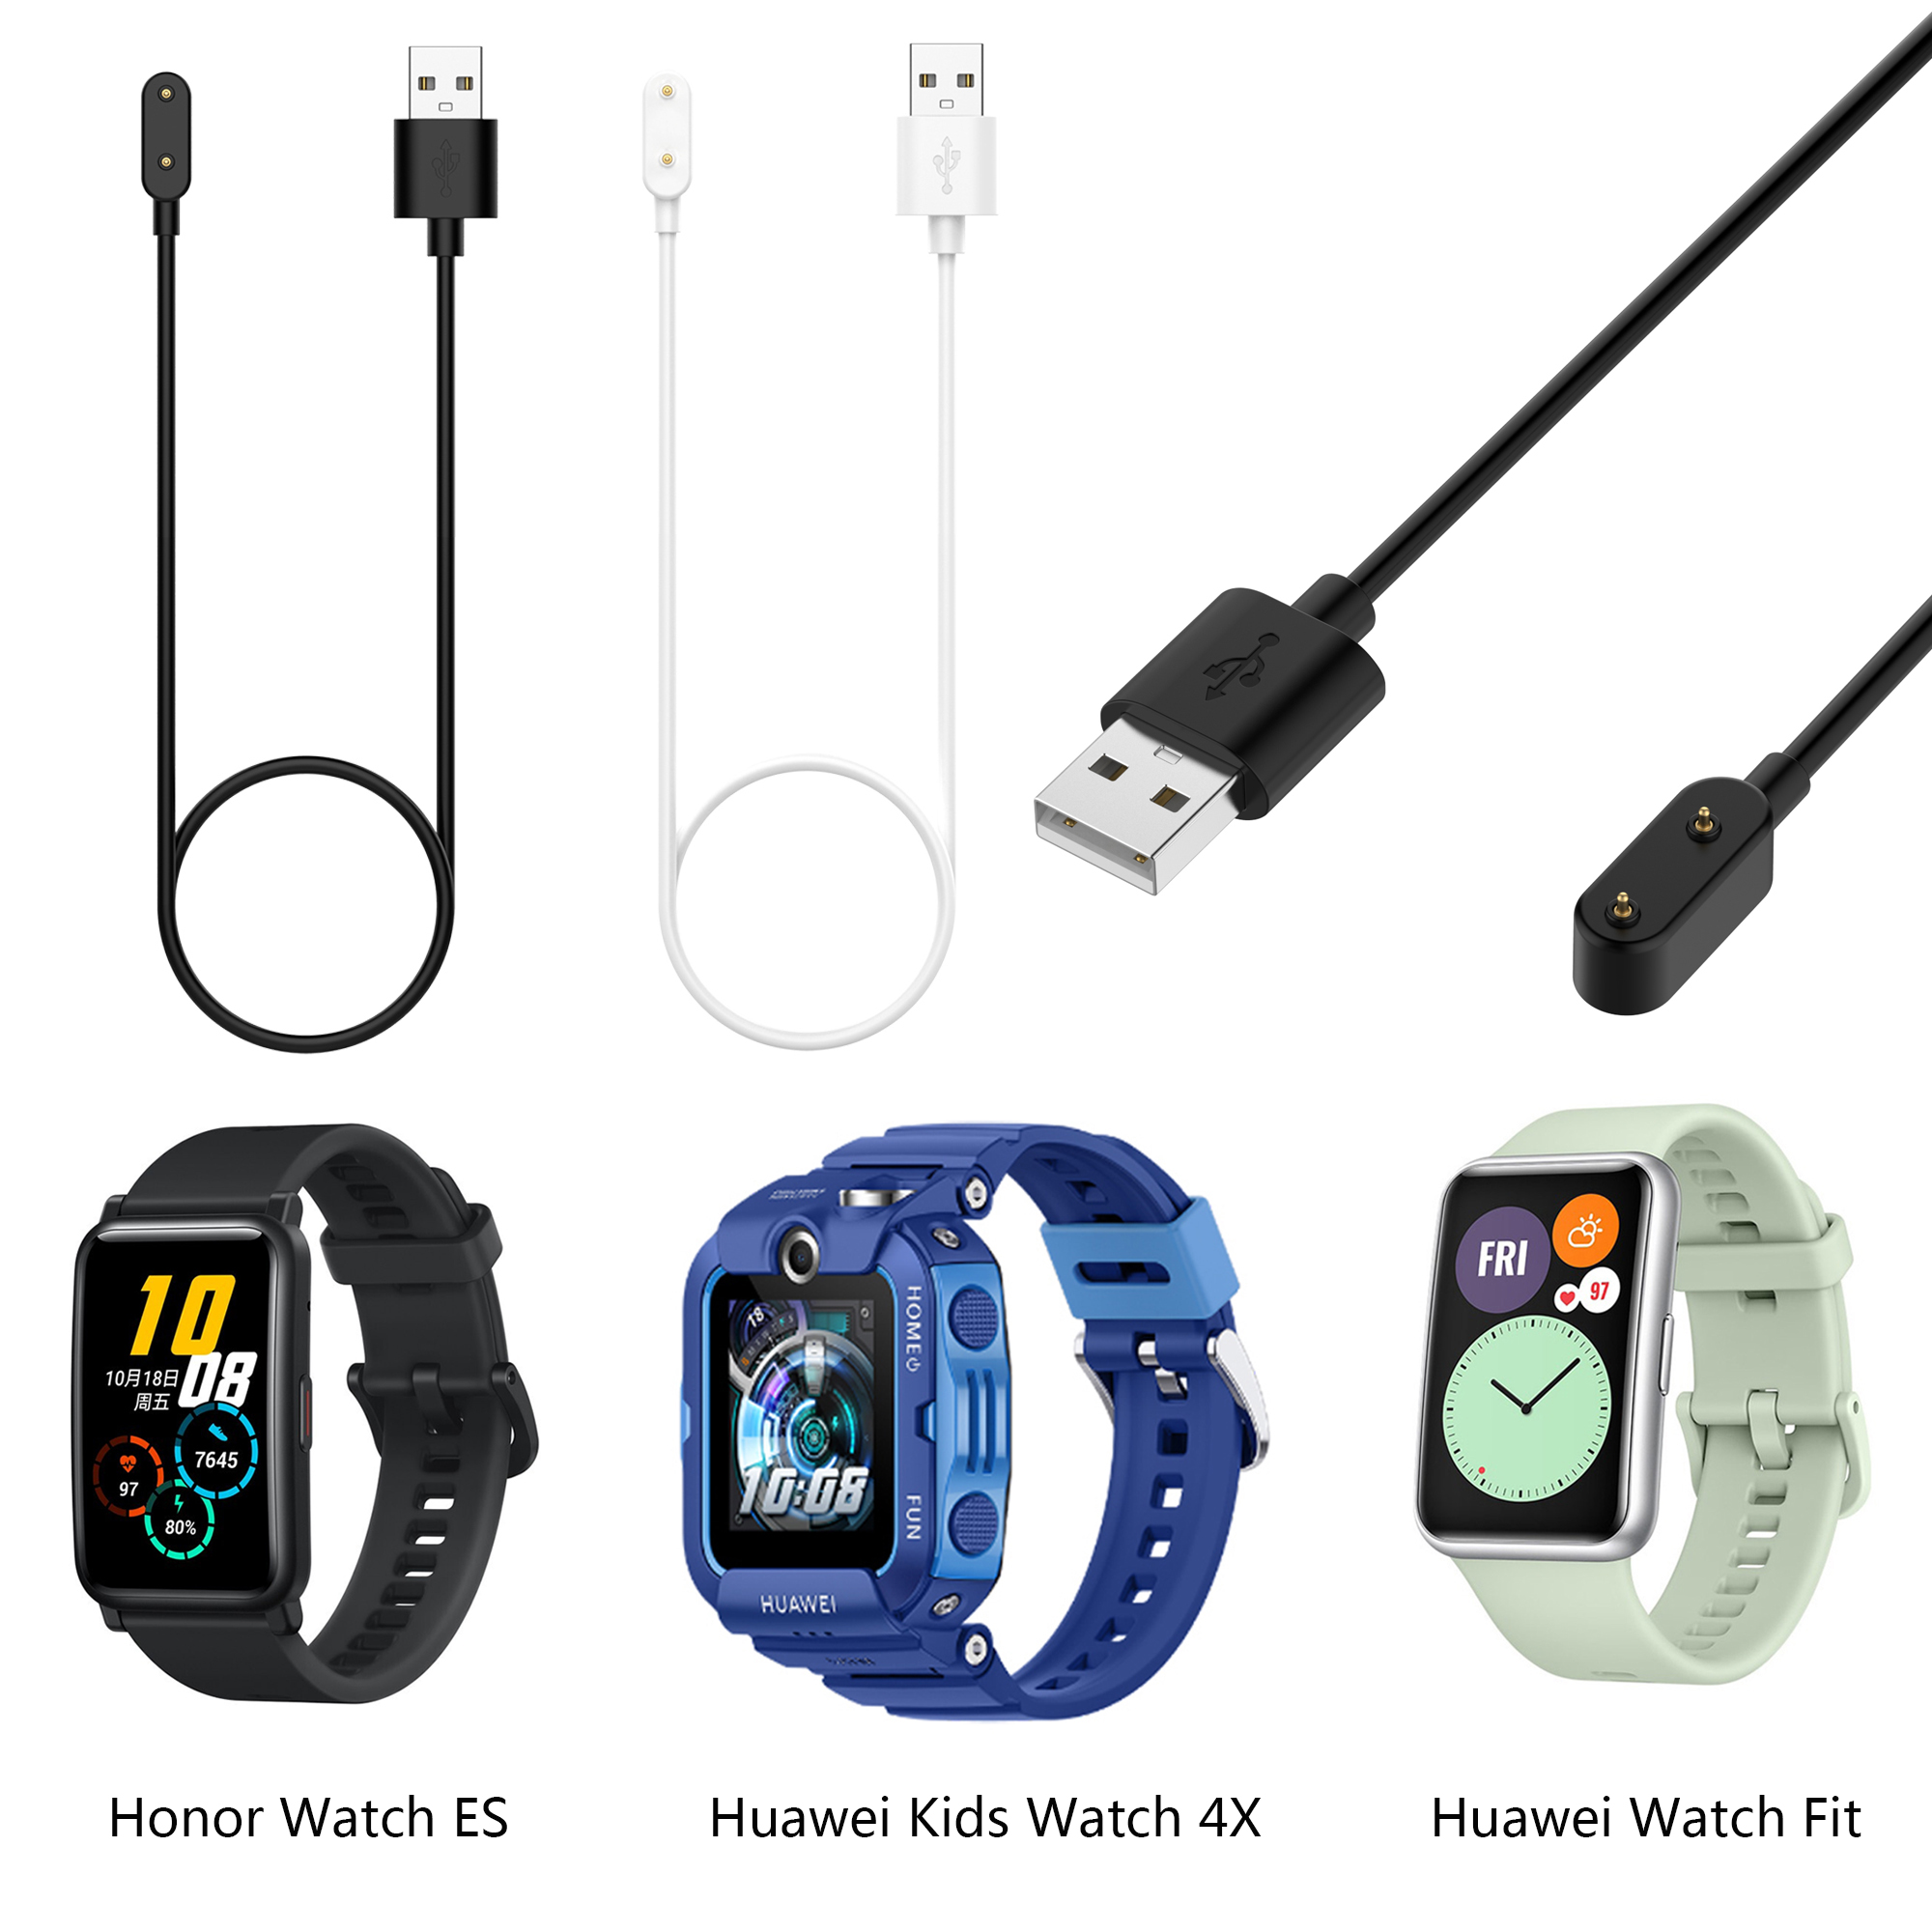 1m Charger For Huawei Watch Fit Kids Watch 4x Honor Es Honor Band 6 Huawei Band 6 Watch Charging Cable Charger Cord Dock Accessory Shopee Singapore